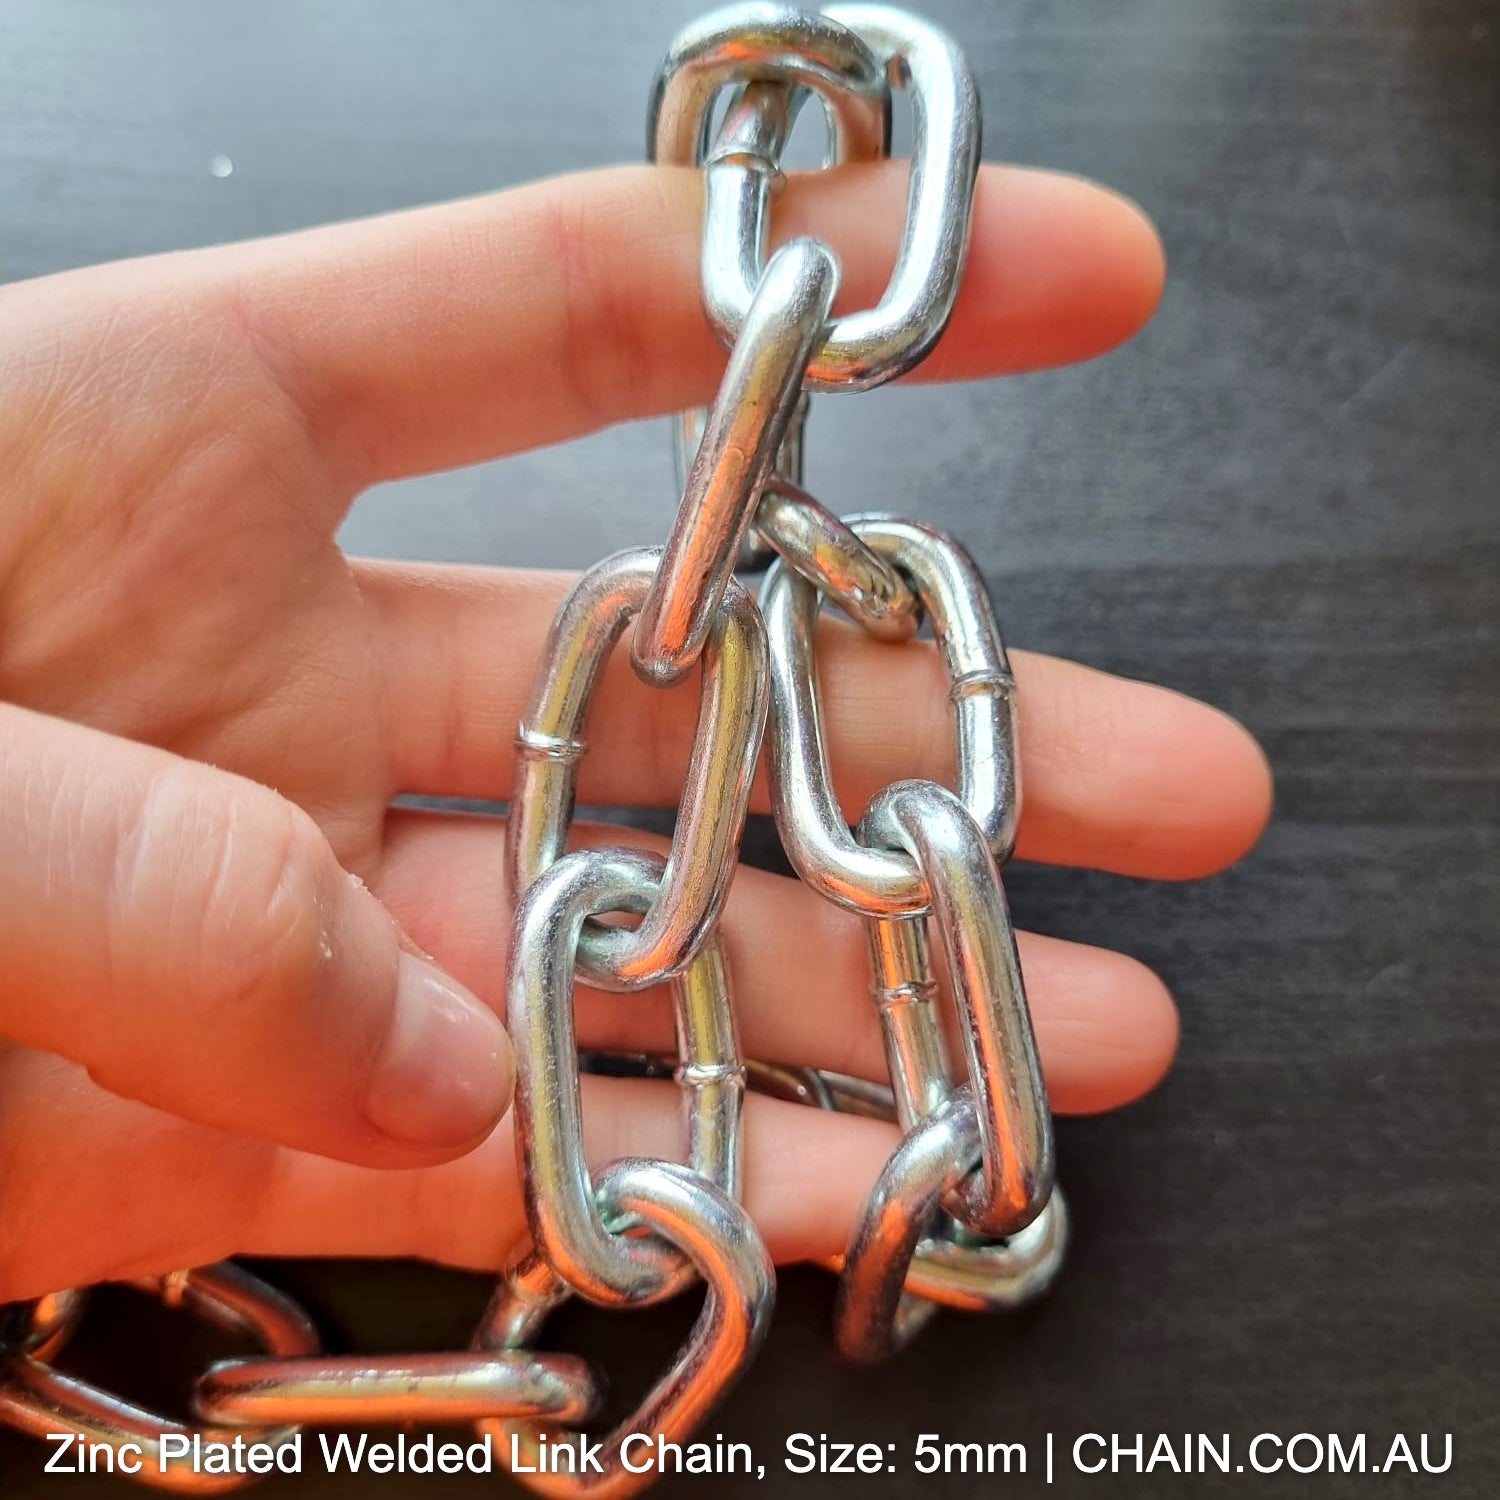 5mm zinc plated welded link chain. Order by the metre or bulk 25kg bucket. Australia wide delivery. Shop chain online chain.com.au